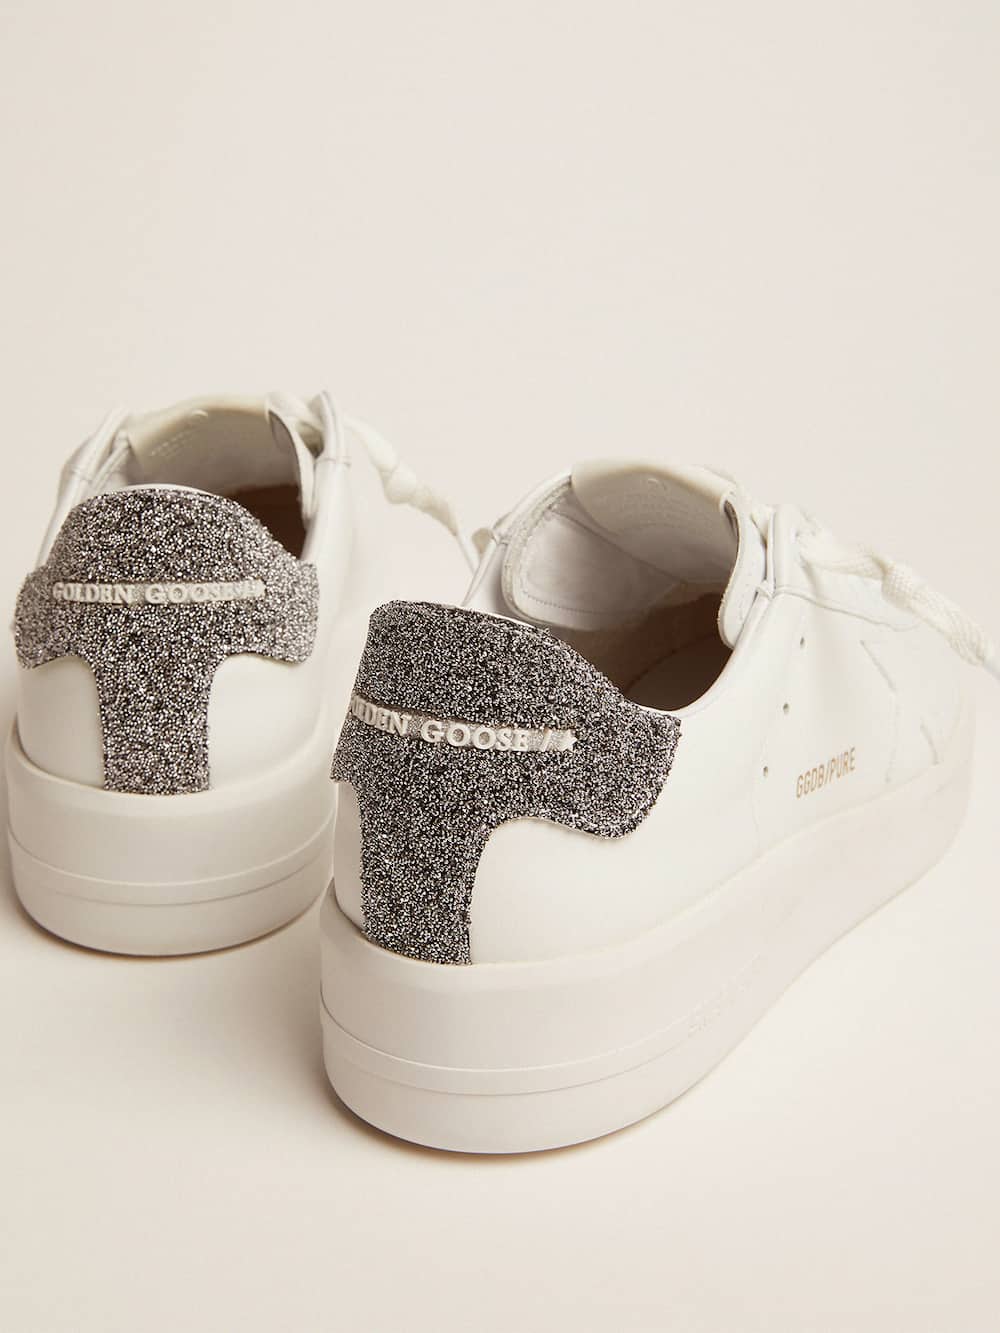 Golden Goose - Purestar in white leather with silver Swarovski crystal heel tab in 